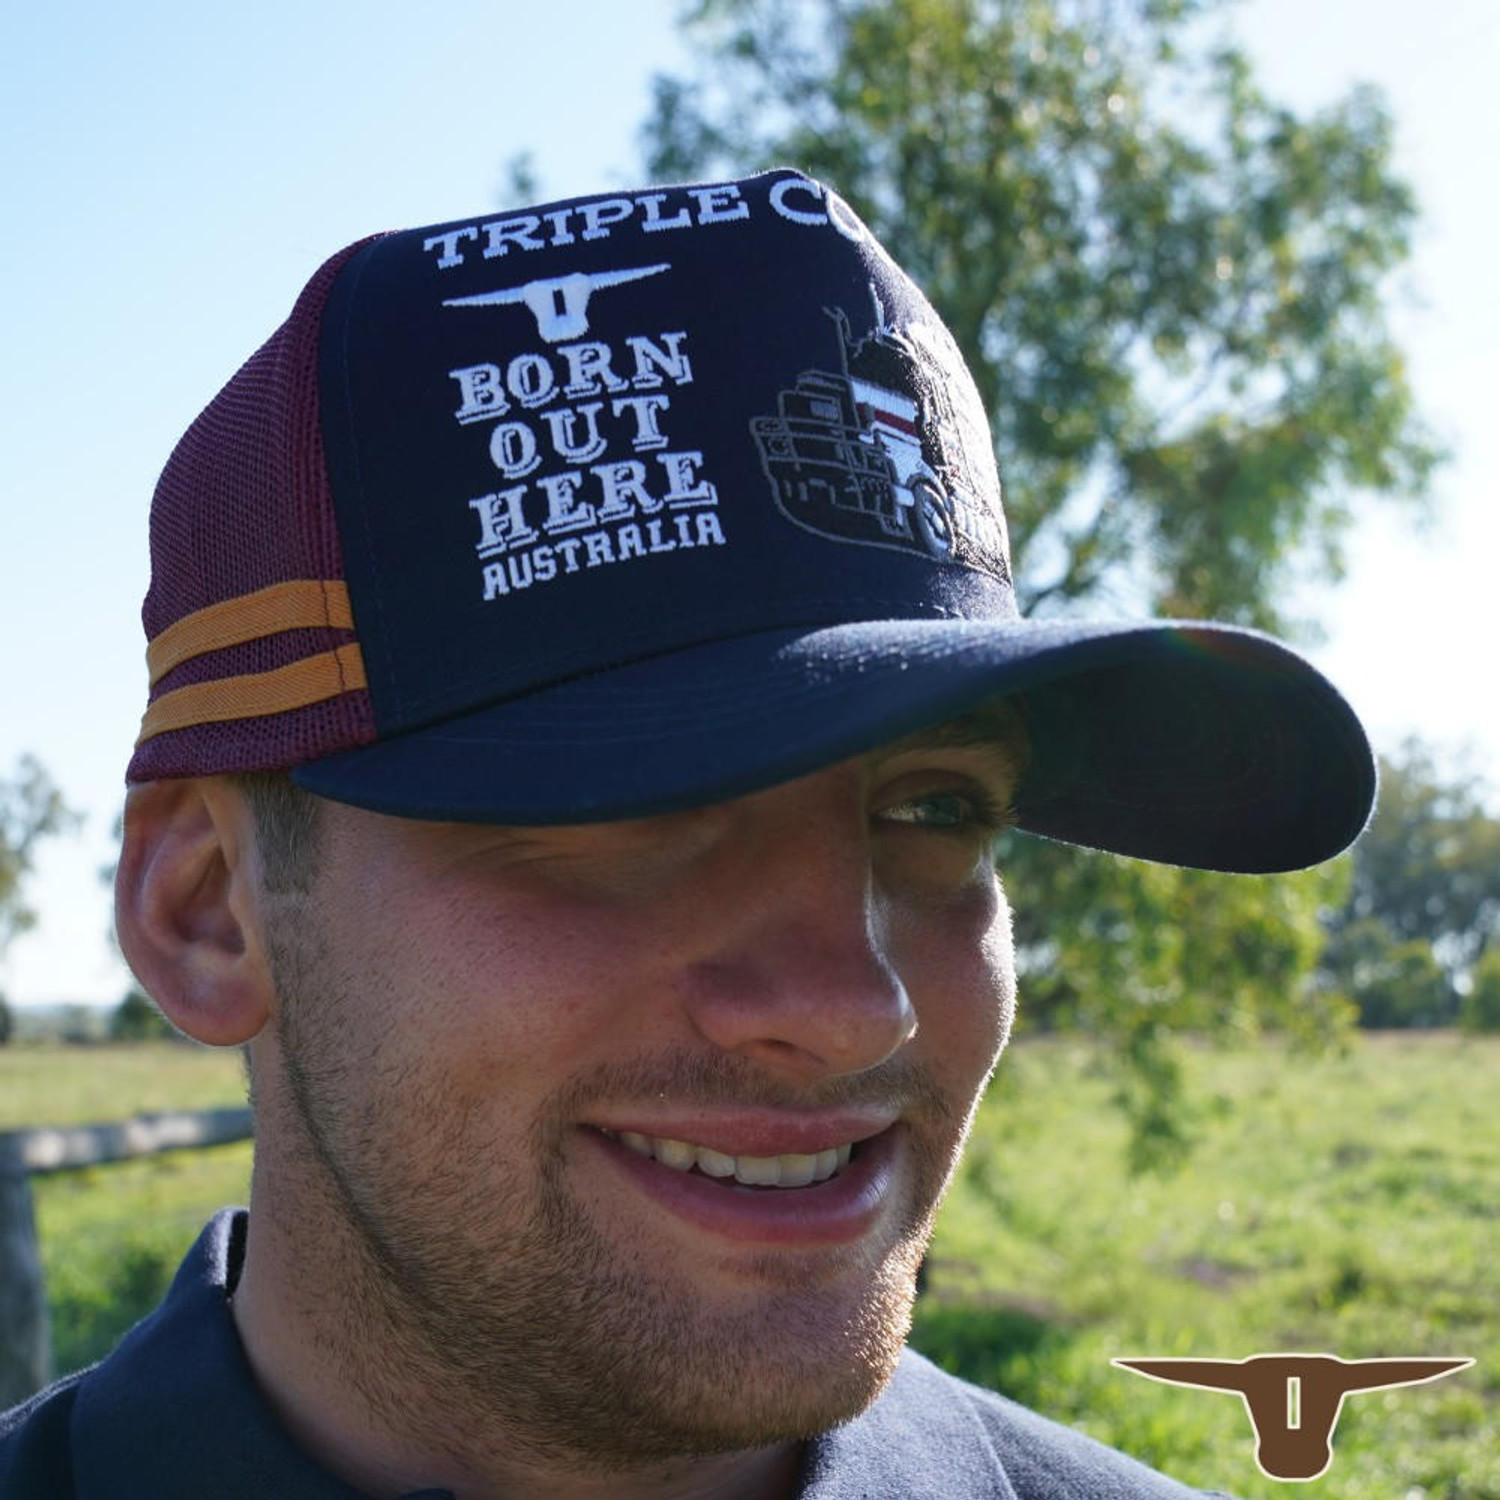  Born Out Here Triple Country Cap in Navy/Maroon 